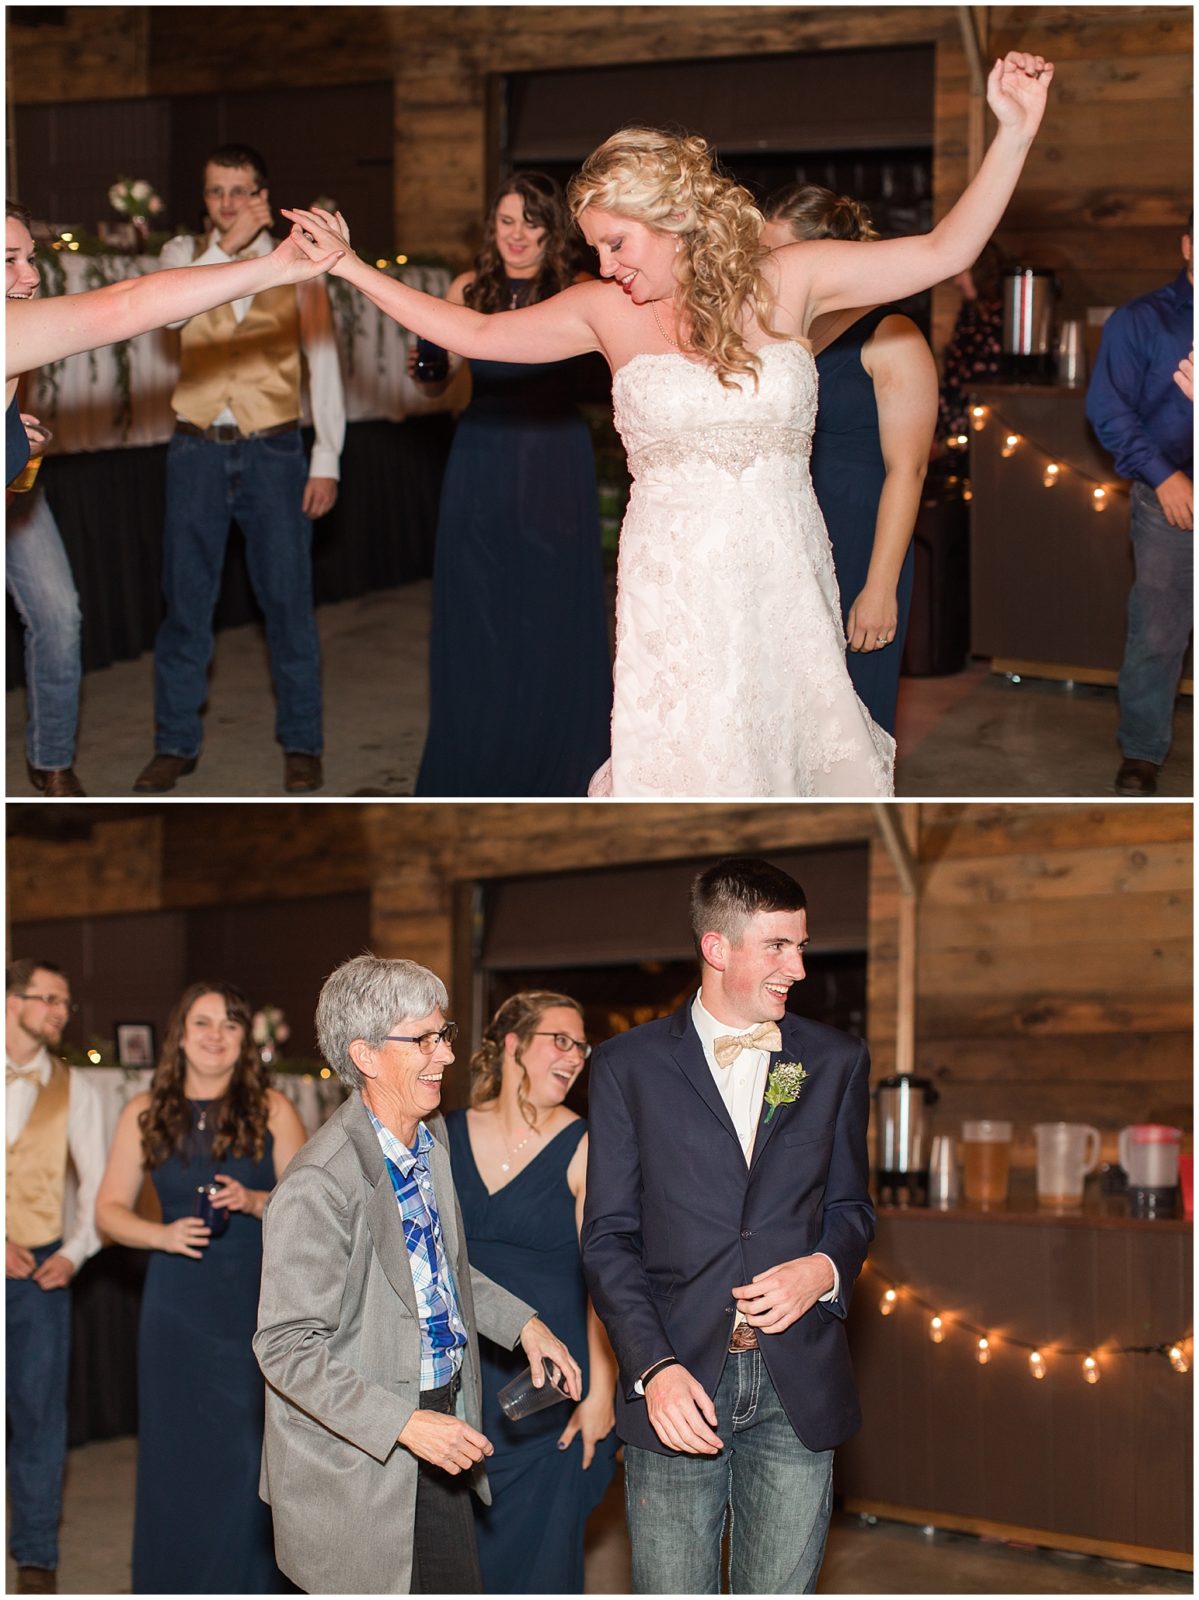 Reception at Stanton Old Lumber Yard in Stanton, Iowa shot by Jessica Brees, Sioux City Iowa engagement and wedding photographer